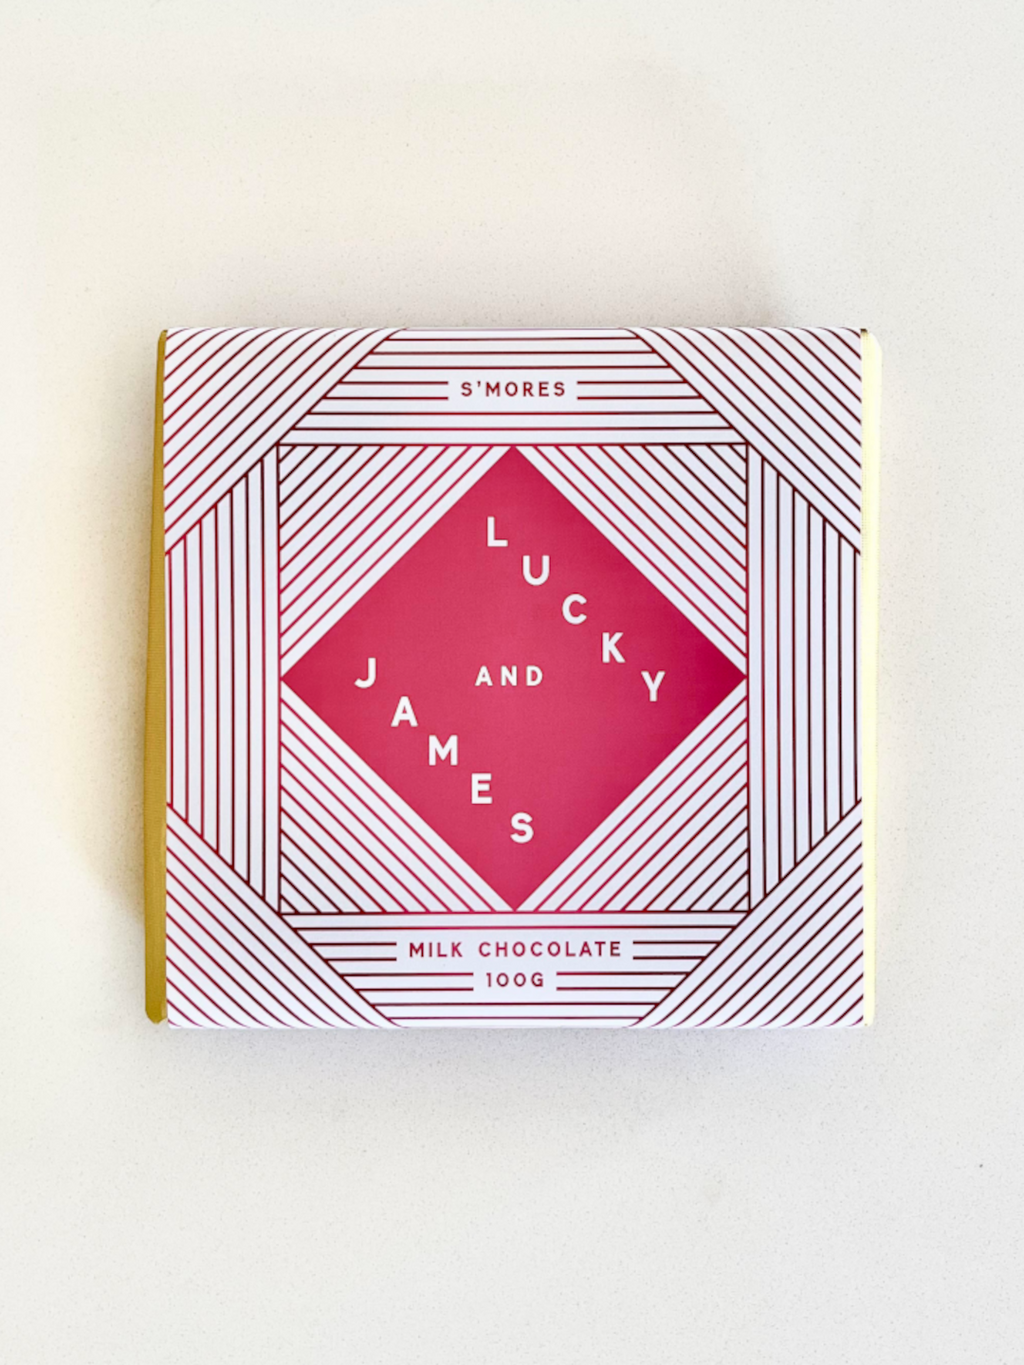 S'MORES MILK CHOCOLATE BY LUCKY AND JAMES